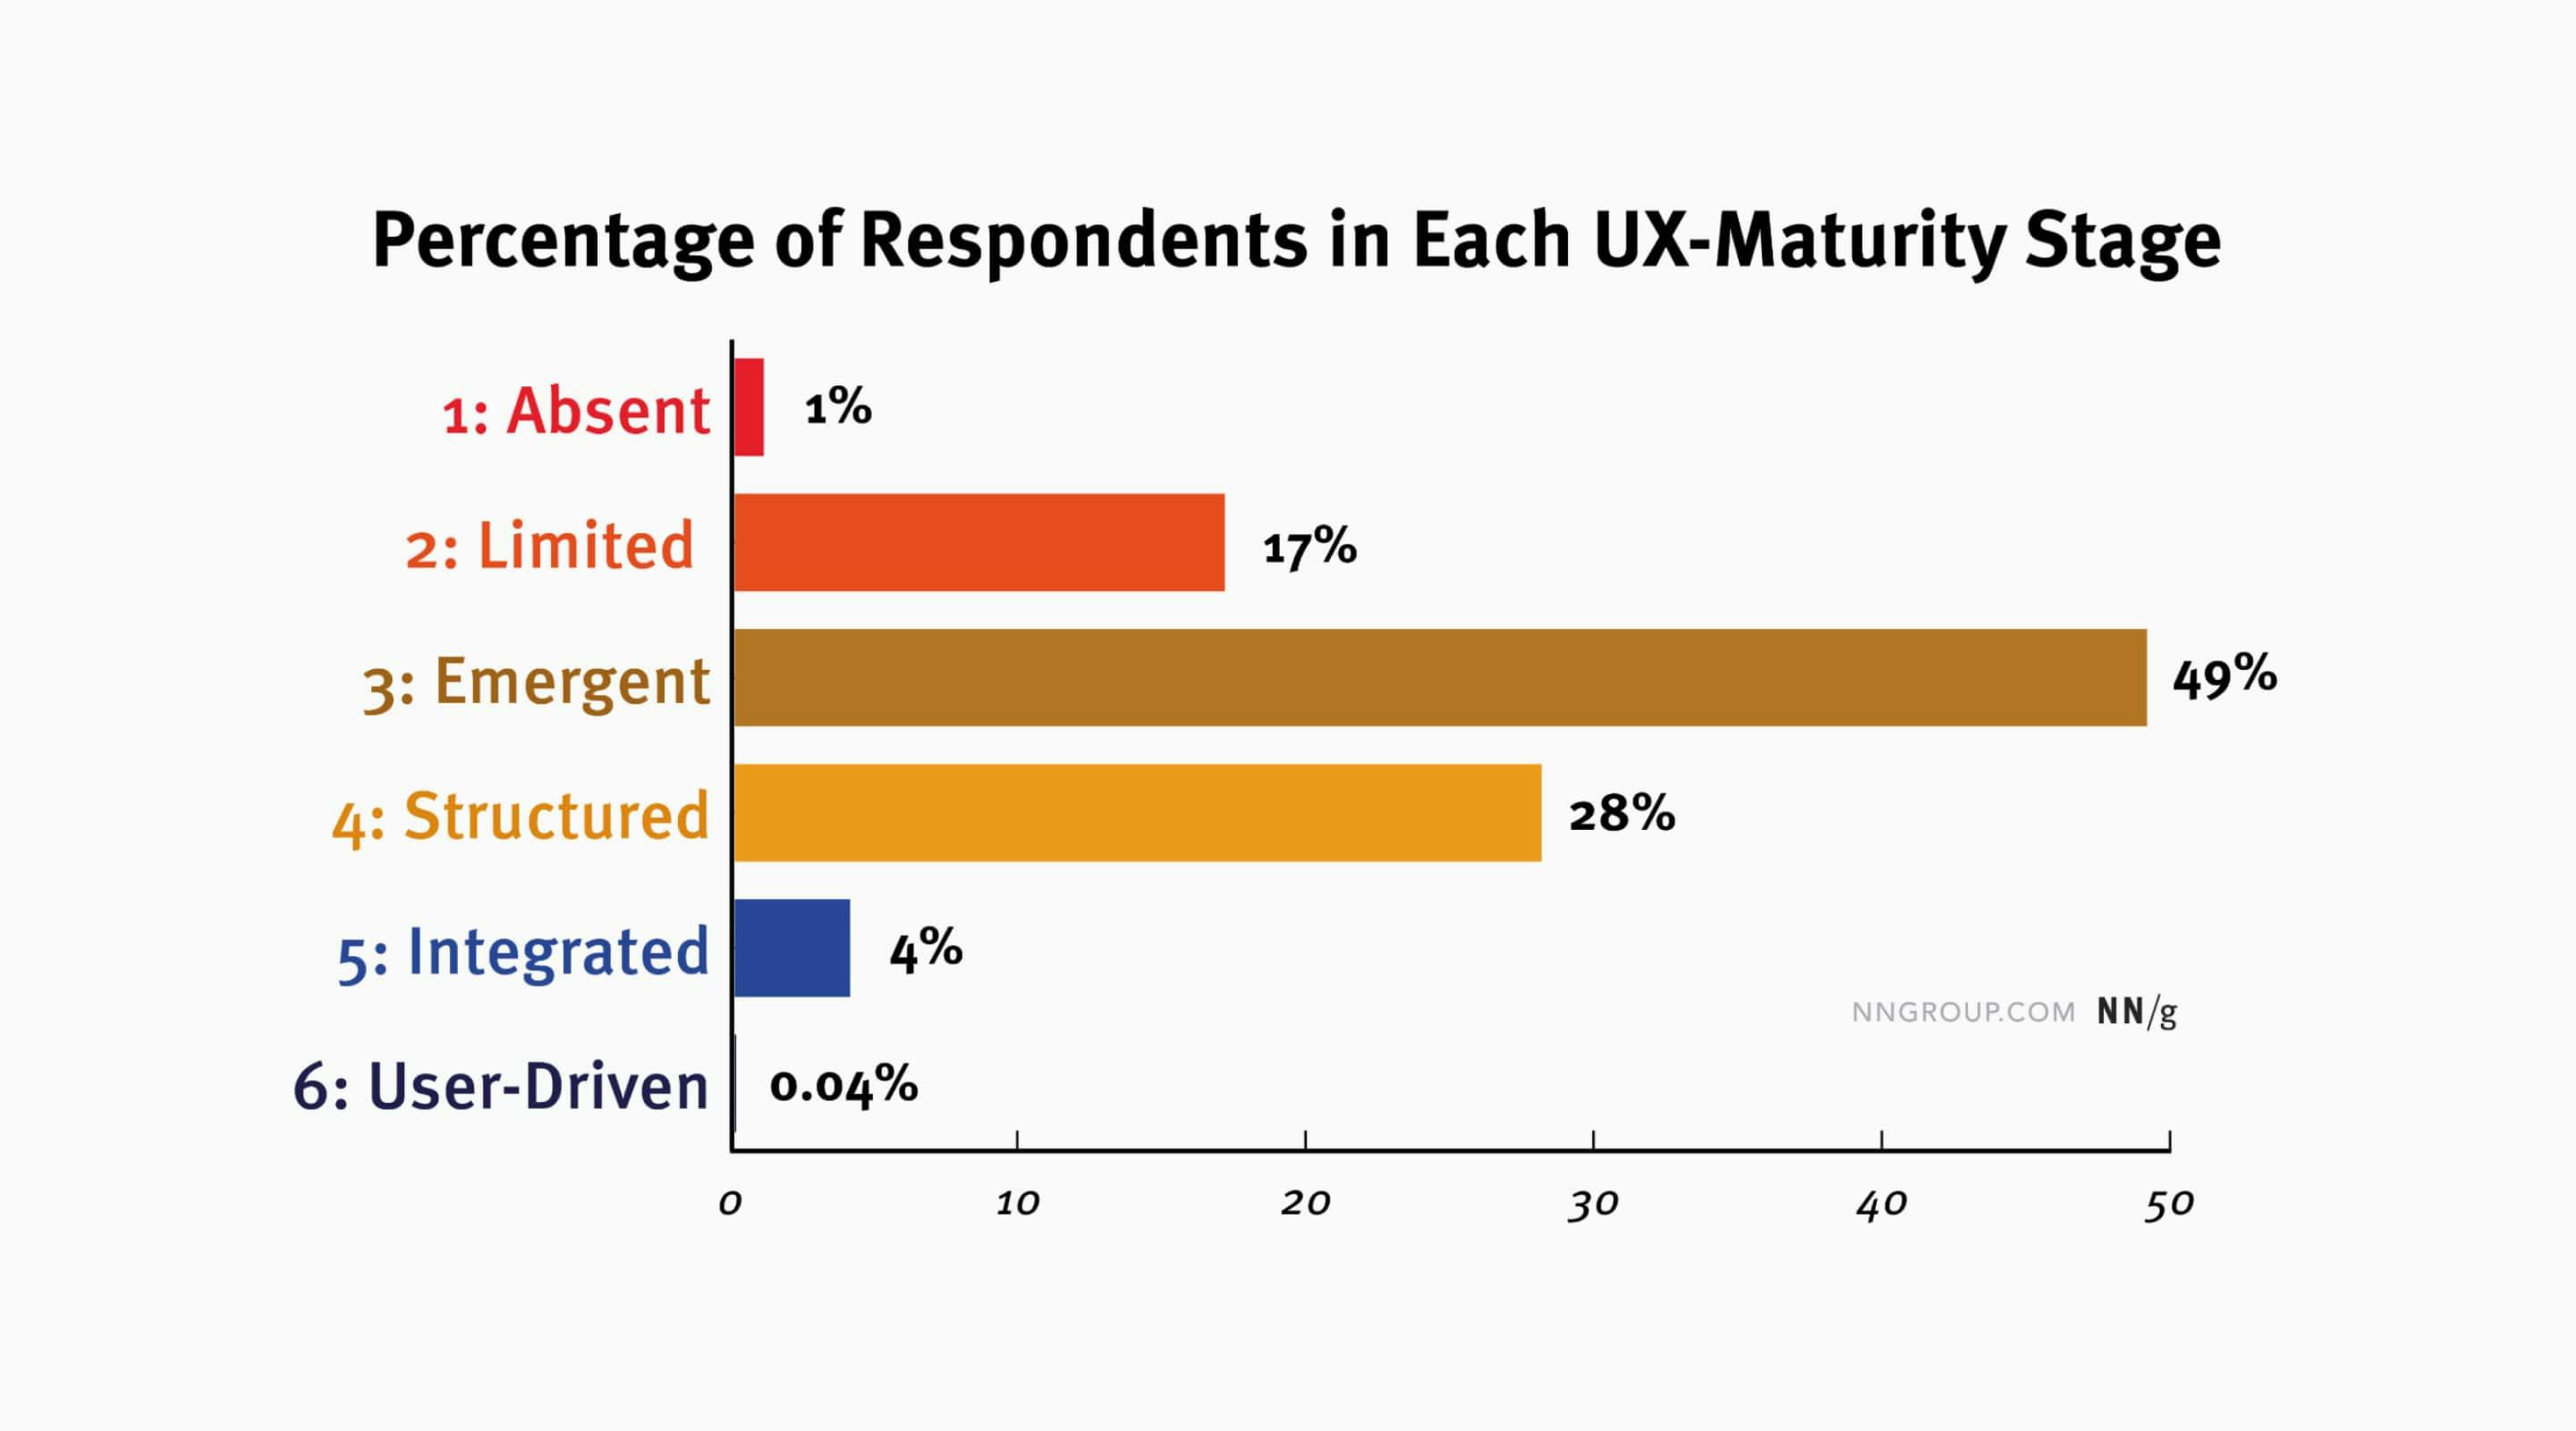 UX Maturity Self-Assessment quiz responses. NN/g states that due to a selection bias as well as the ceiling and floor effect the data might be skewed in a way that presents an improved picture of reality. Image credit and source: Nielsen Norman Group, The State of UX Maturity: Data from Our Self-Assessment Quiz